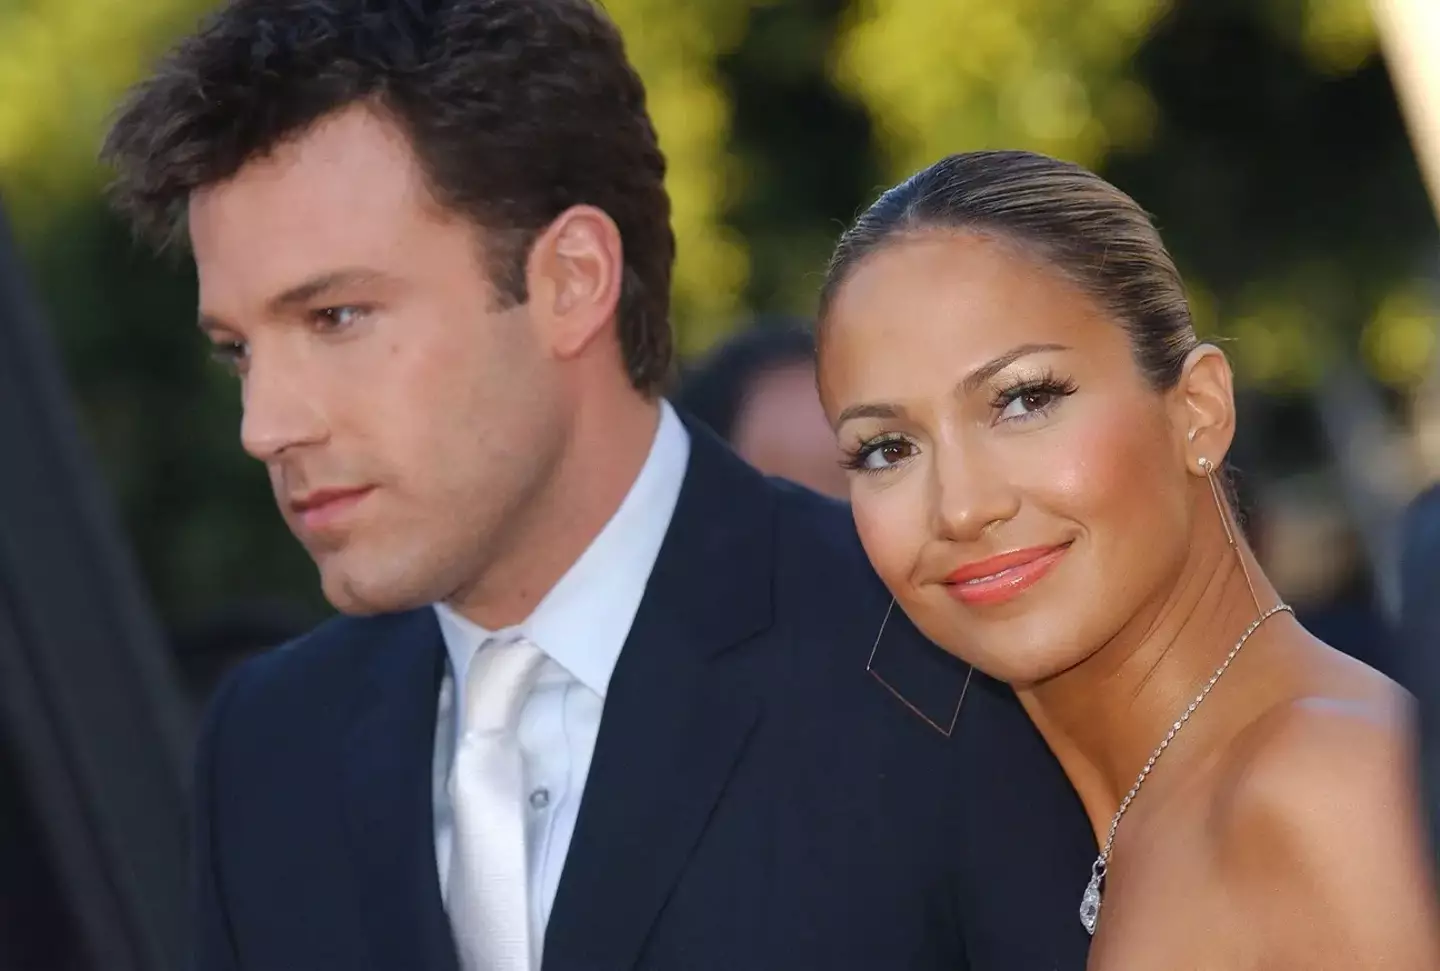 Jennifer Lopez and Ben Affleck announced their engagement in April 2022.